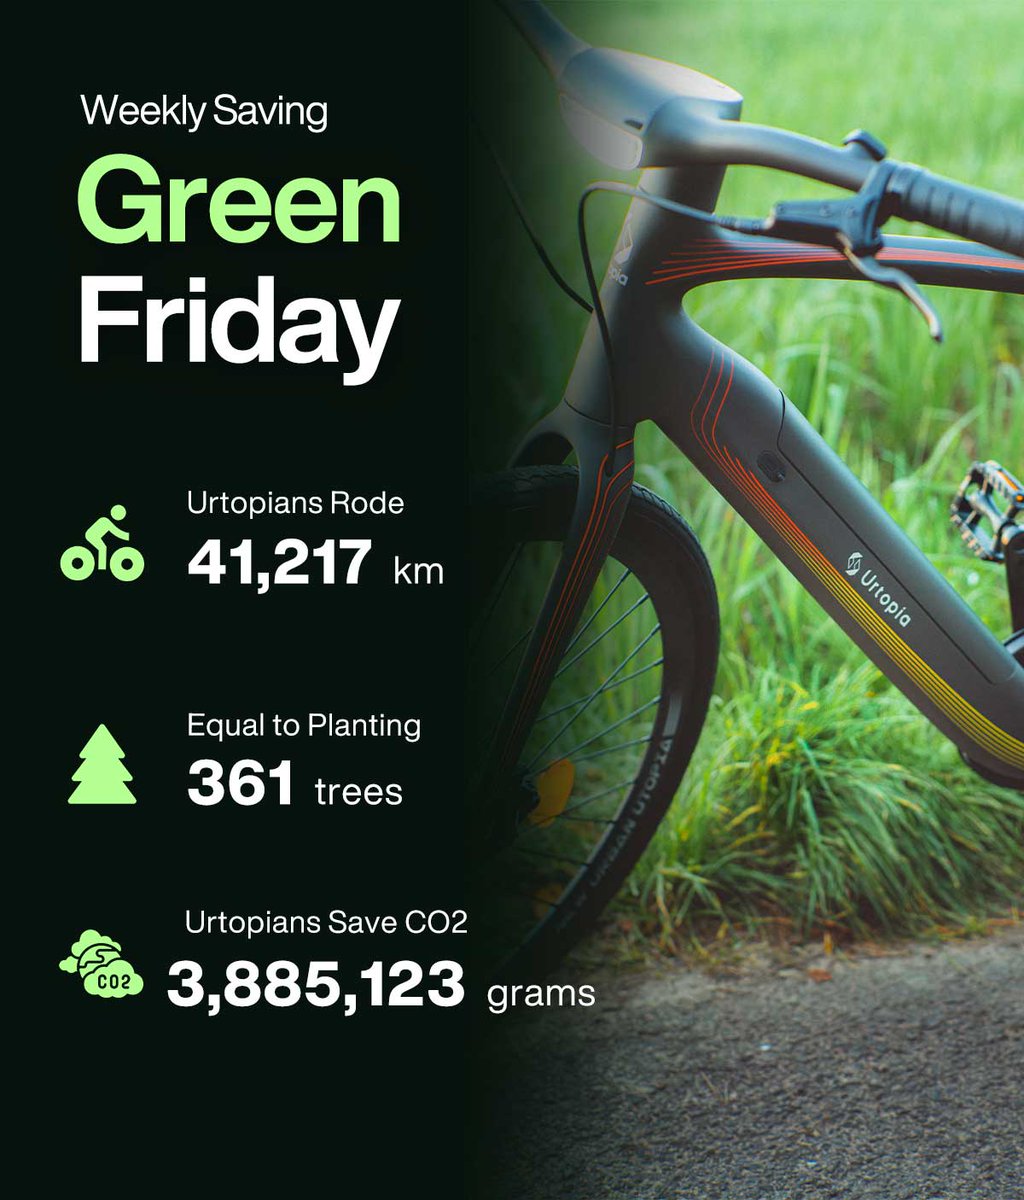 Green Friday, Ride Greener! This week, Urtopians collectively rode 41,217km, resulting in a reduction of 3,885,123 grams of CO2 emissions, equivalent to planting 361 trees. Learn more: newurtopia.com/pages/sustaina… #UrtopiaEbike #ebikelife #ebike #GoGreenChallenge